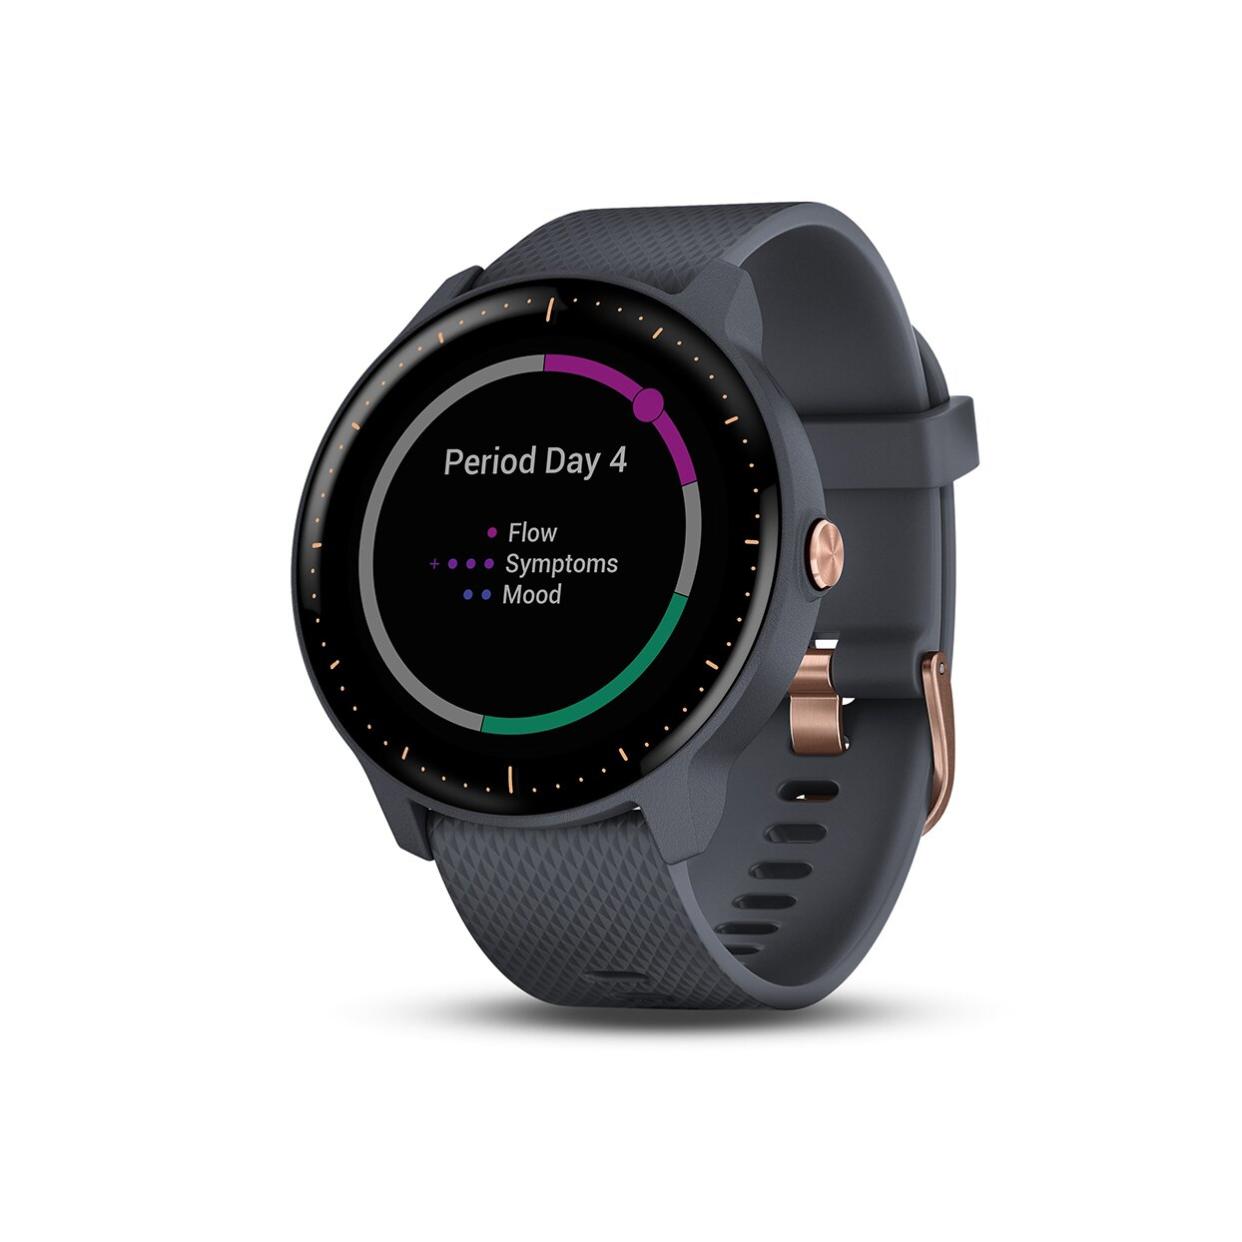 Garmin watch showing new menstrual cycle tracking feature